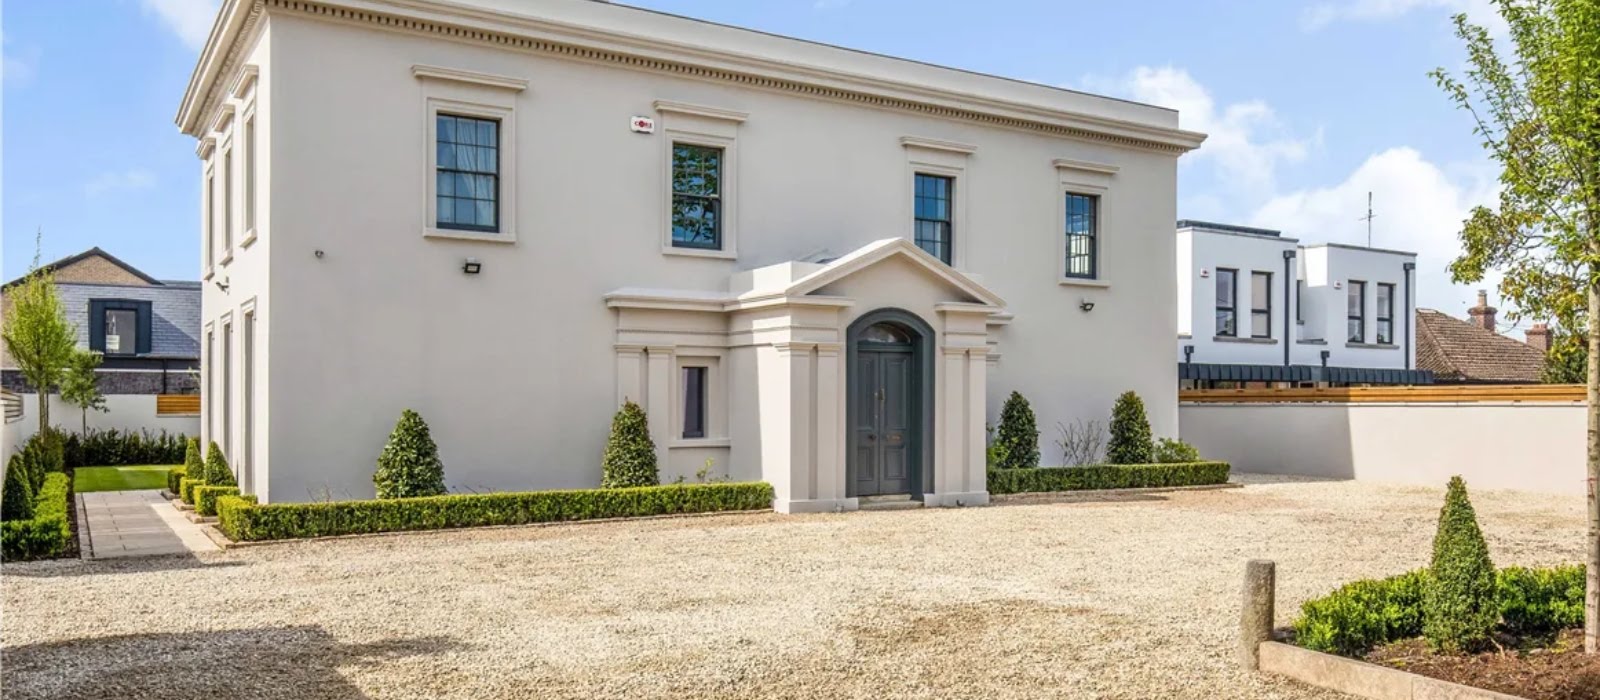 Gowrie House: Inside this grand Glenageary home on the market for €1.9 million